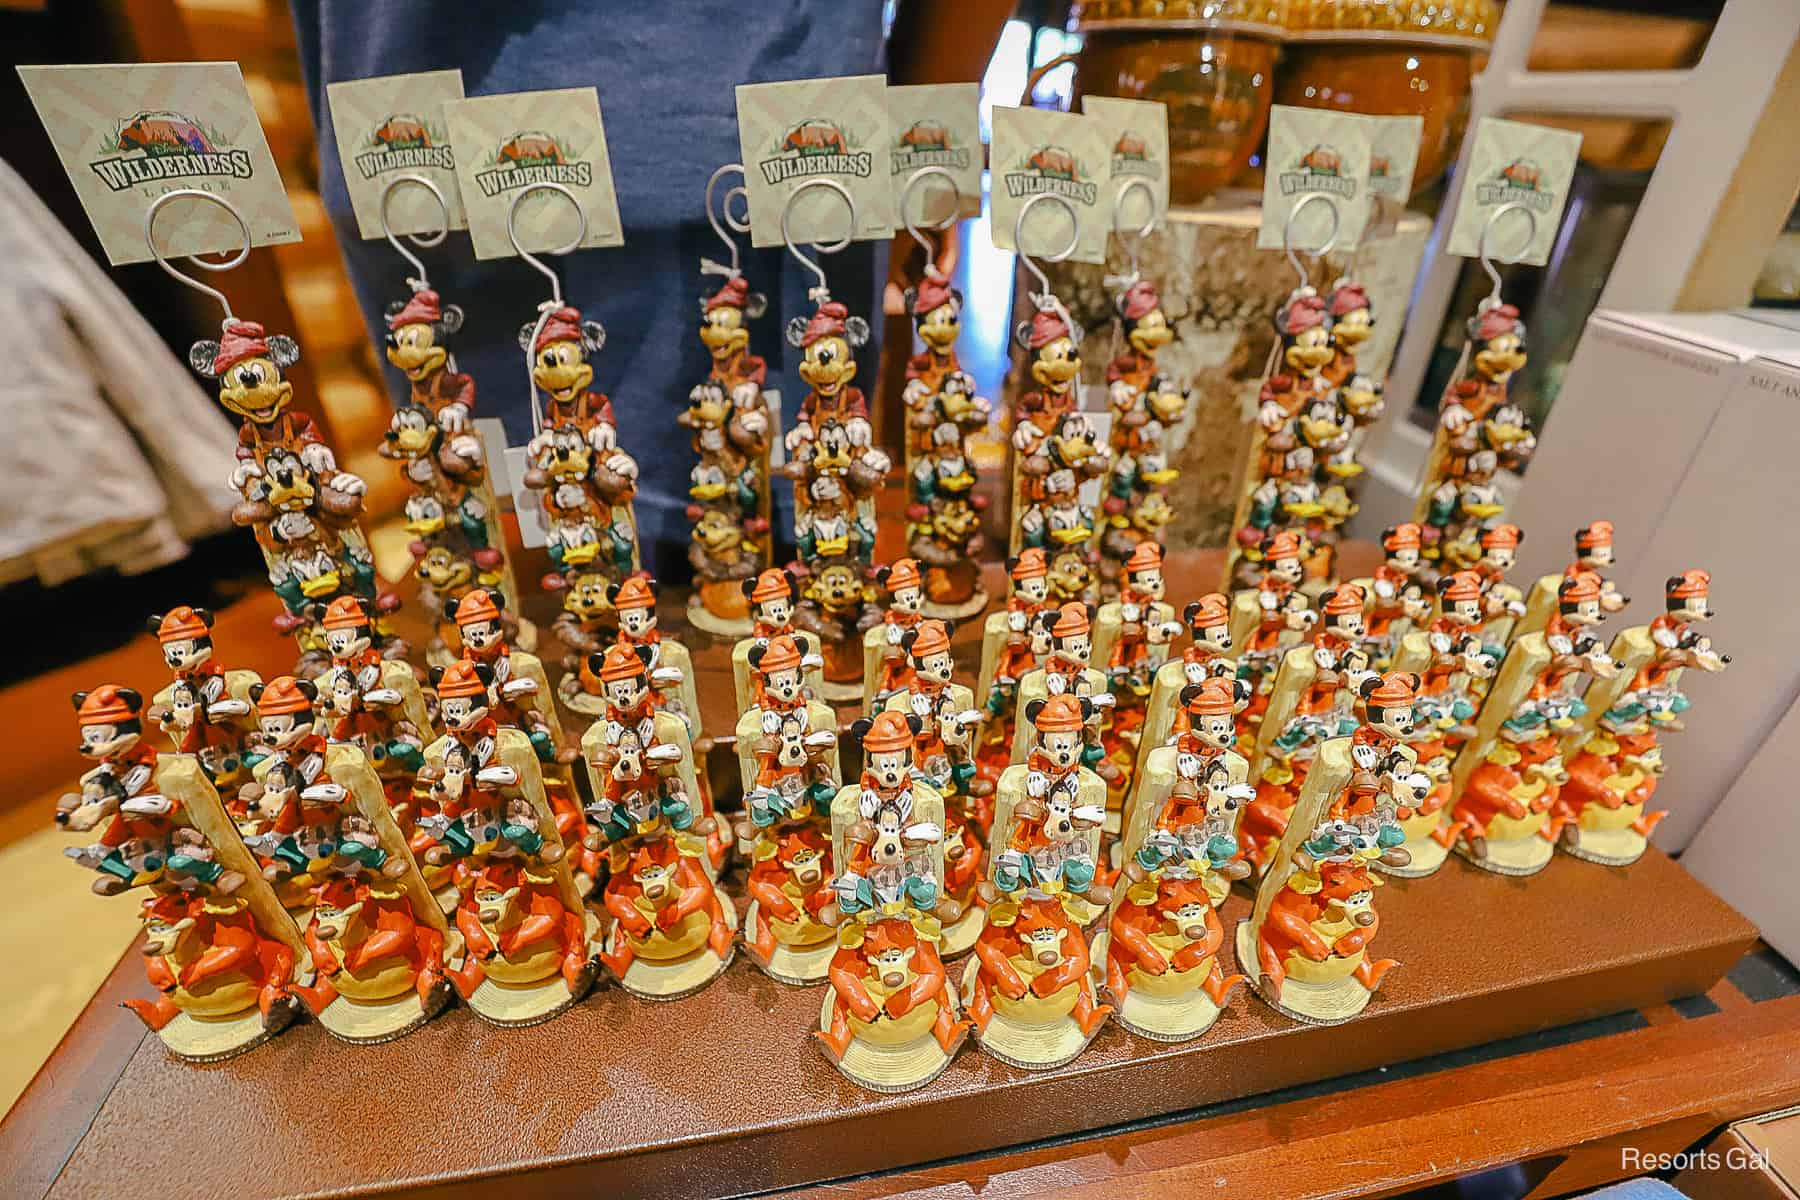 magnets for Disney's Wilderness Lodge that are shaped like the character totem pole at the store's entrance 